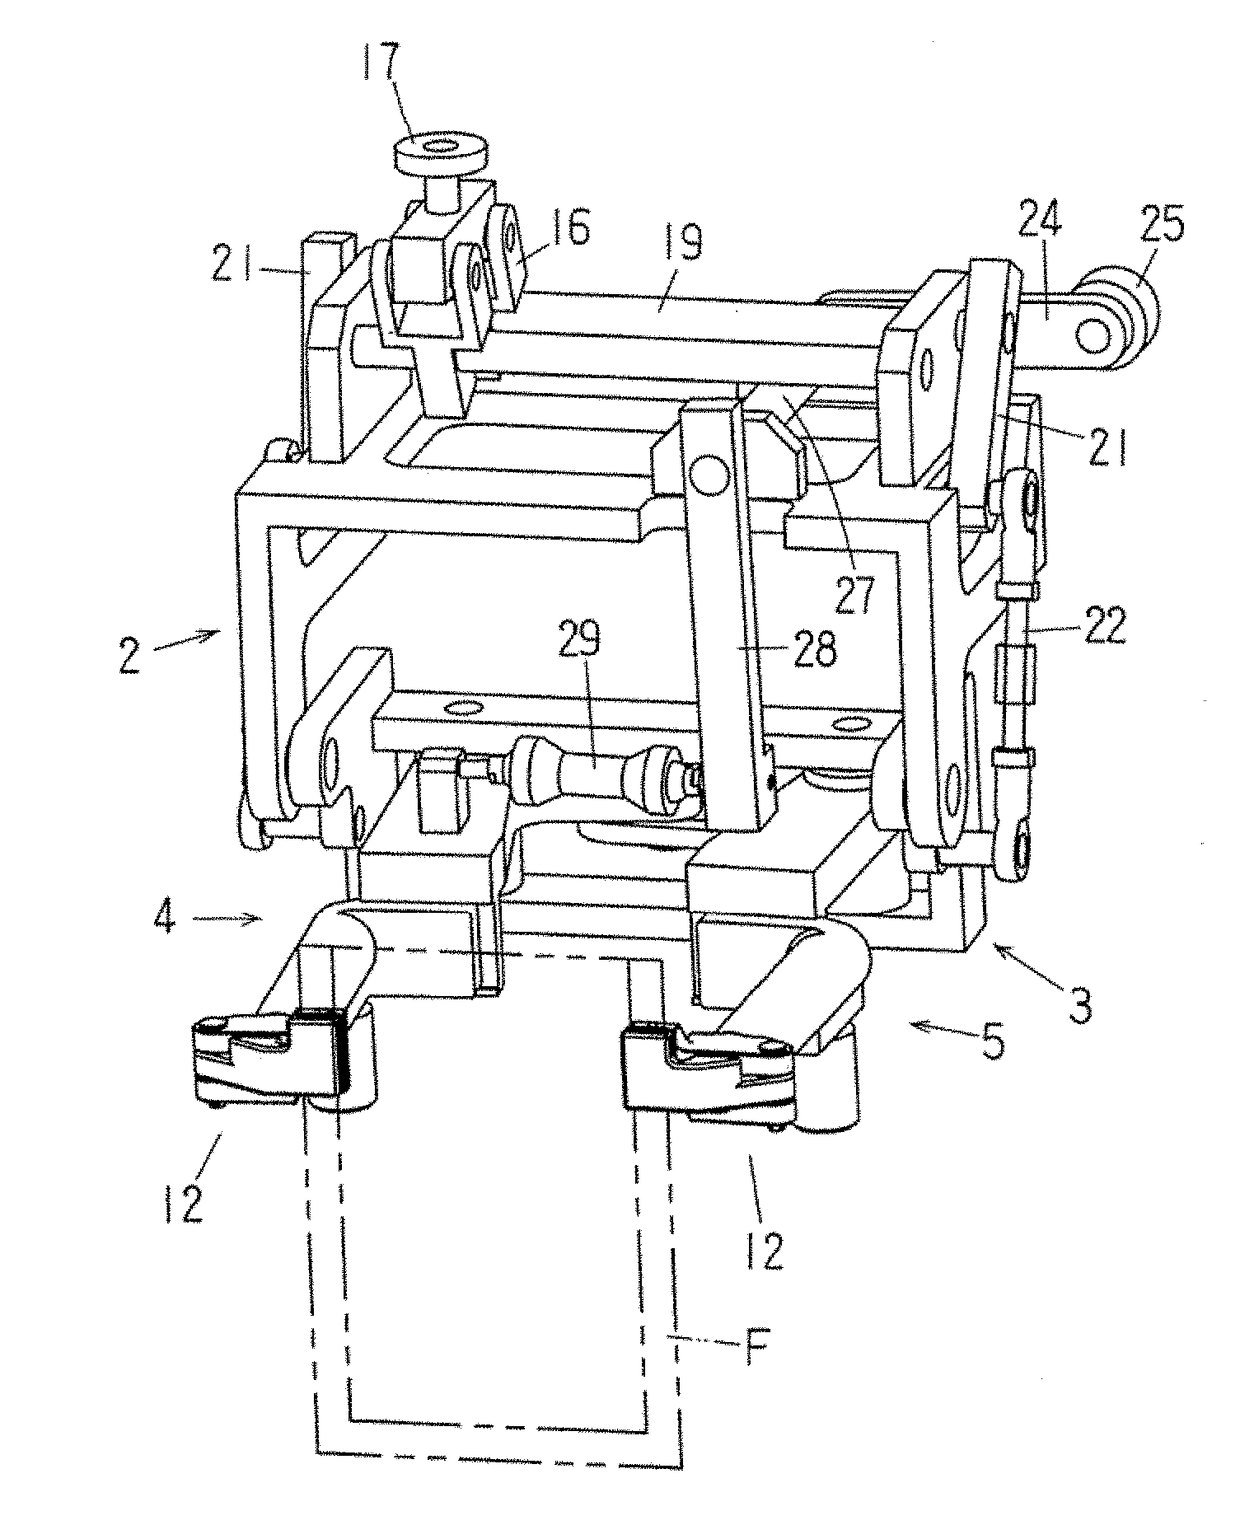 Gripper device for a bag filling and packaging machine